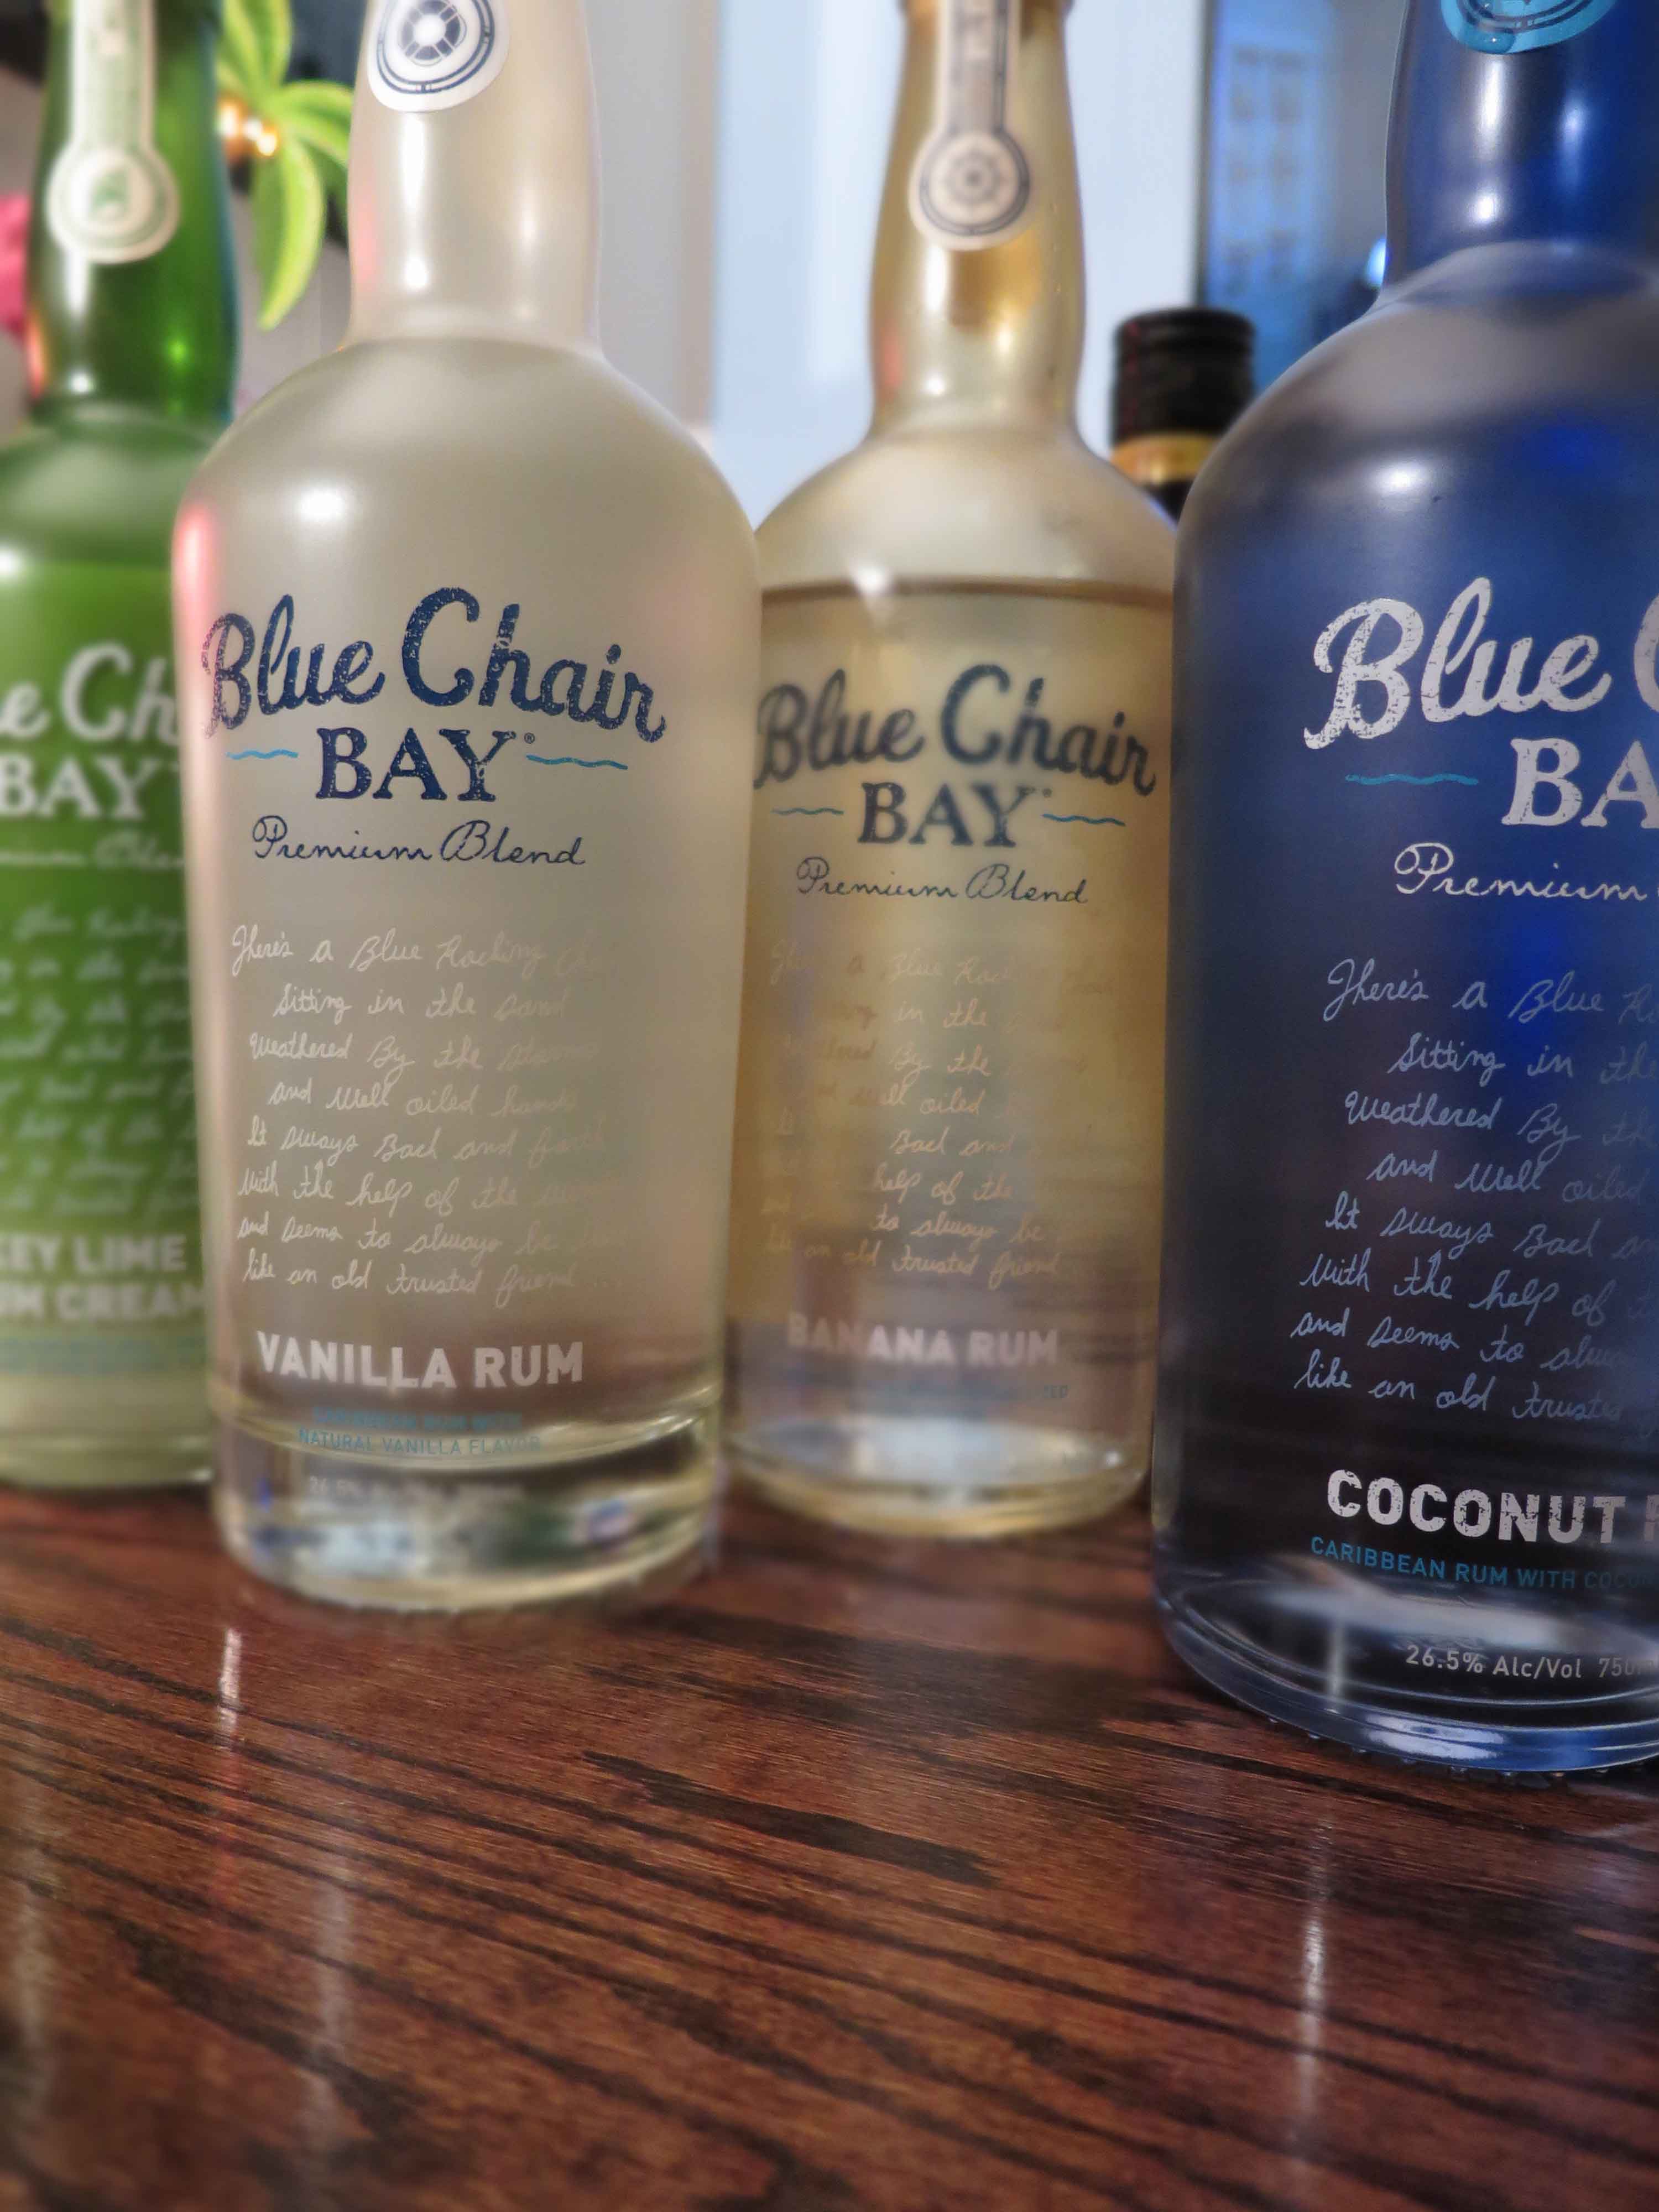 3 Great Ways To Drink Blue Chair Bay Rums Fun In Key West